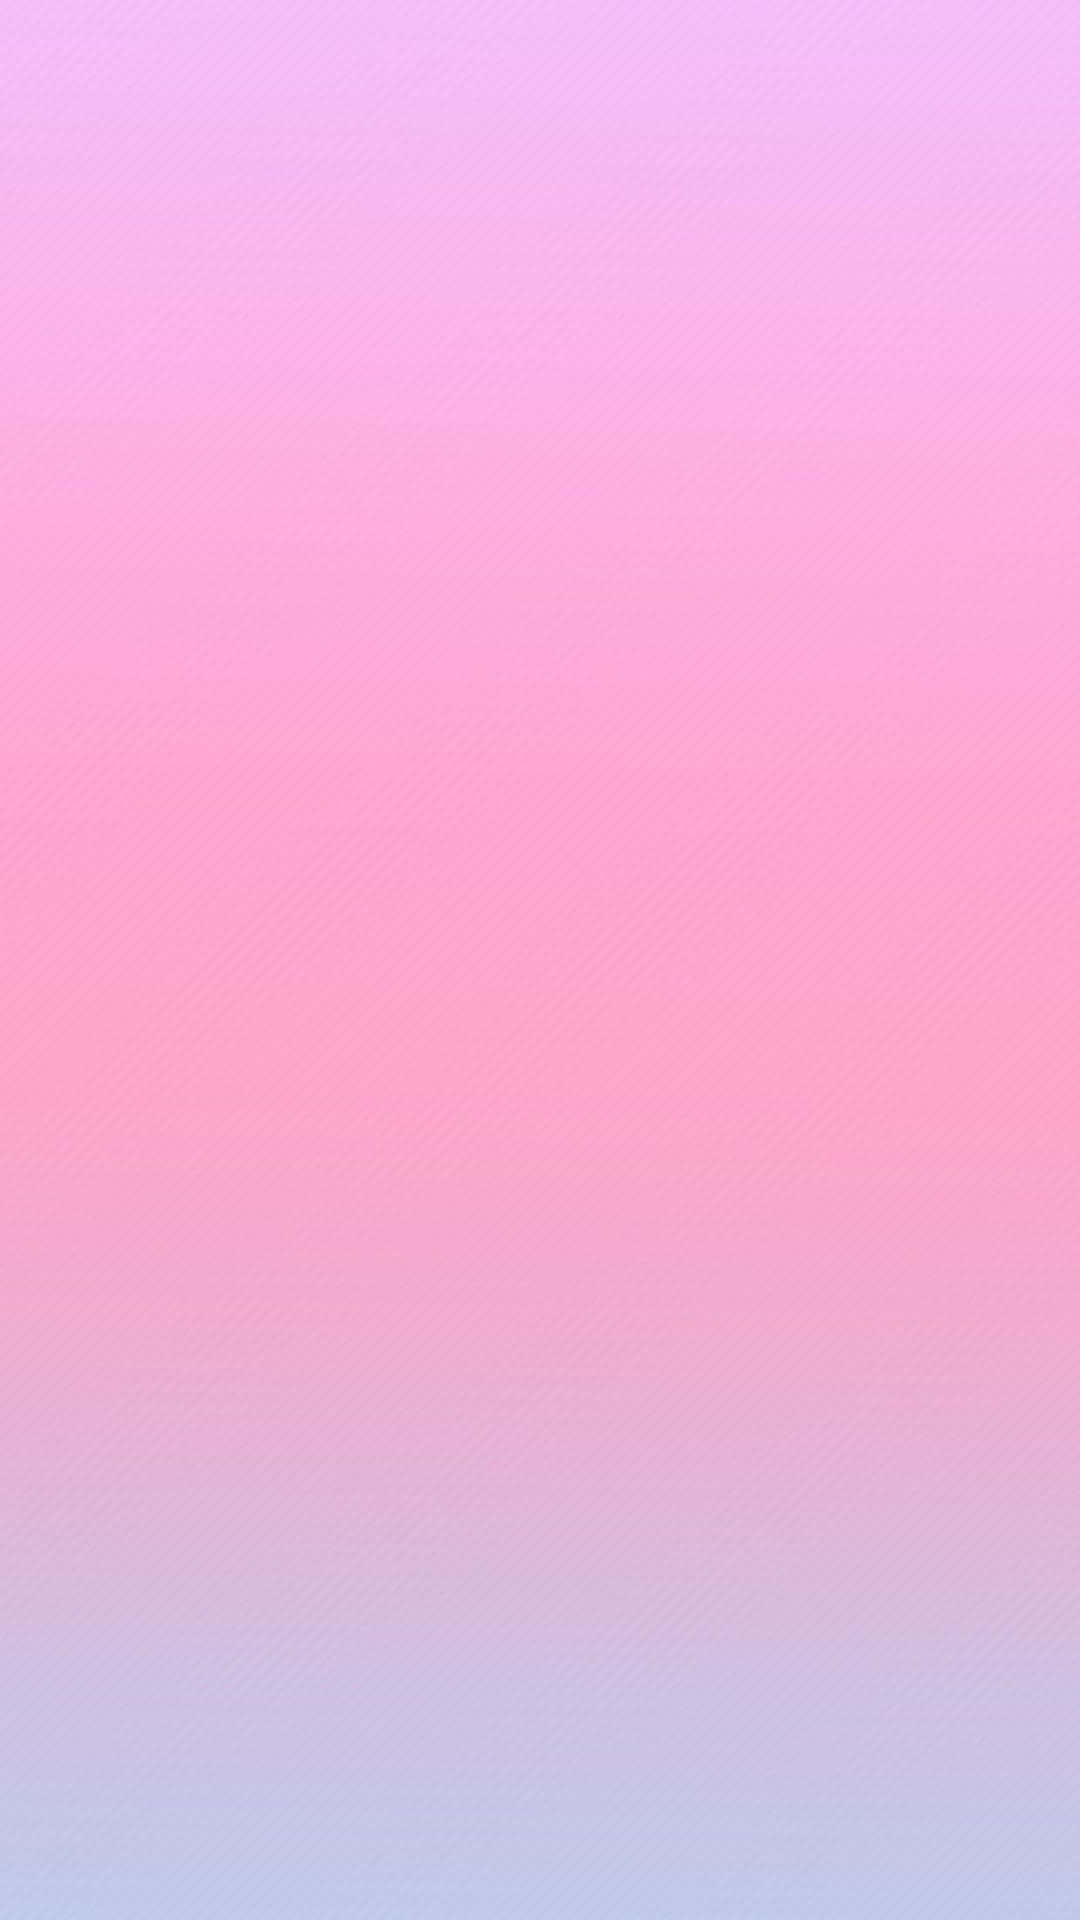 Download Pink Ombre Background 1242 X 2208 | Wallpapers.com